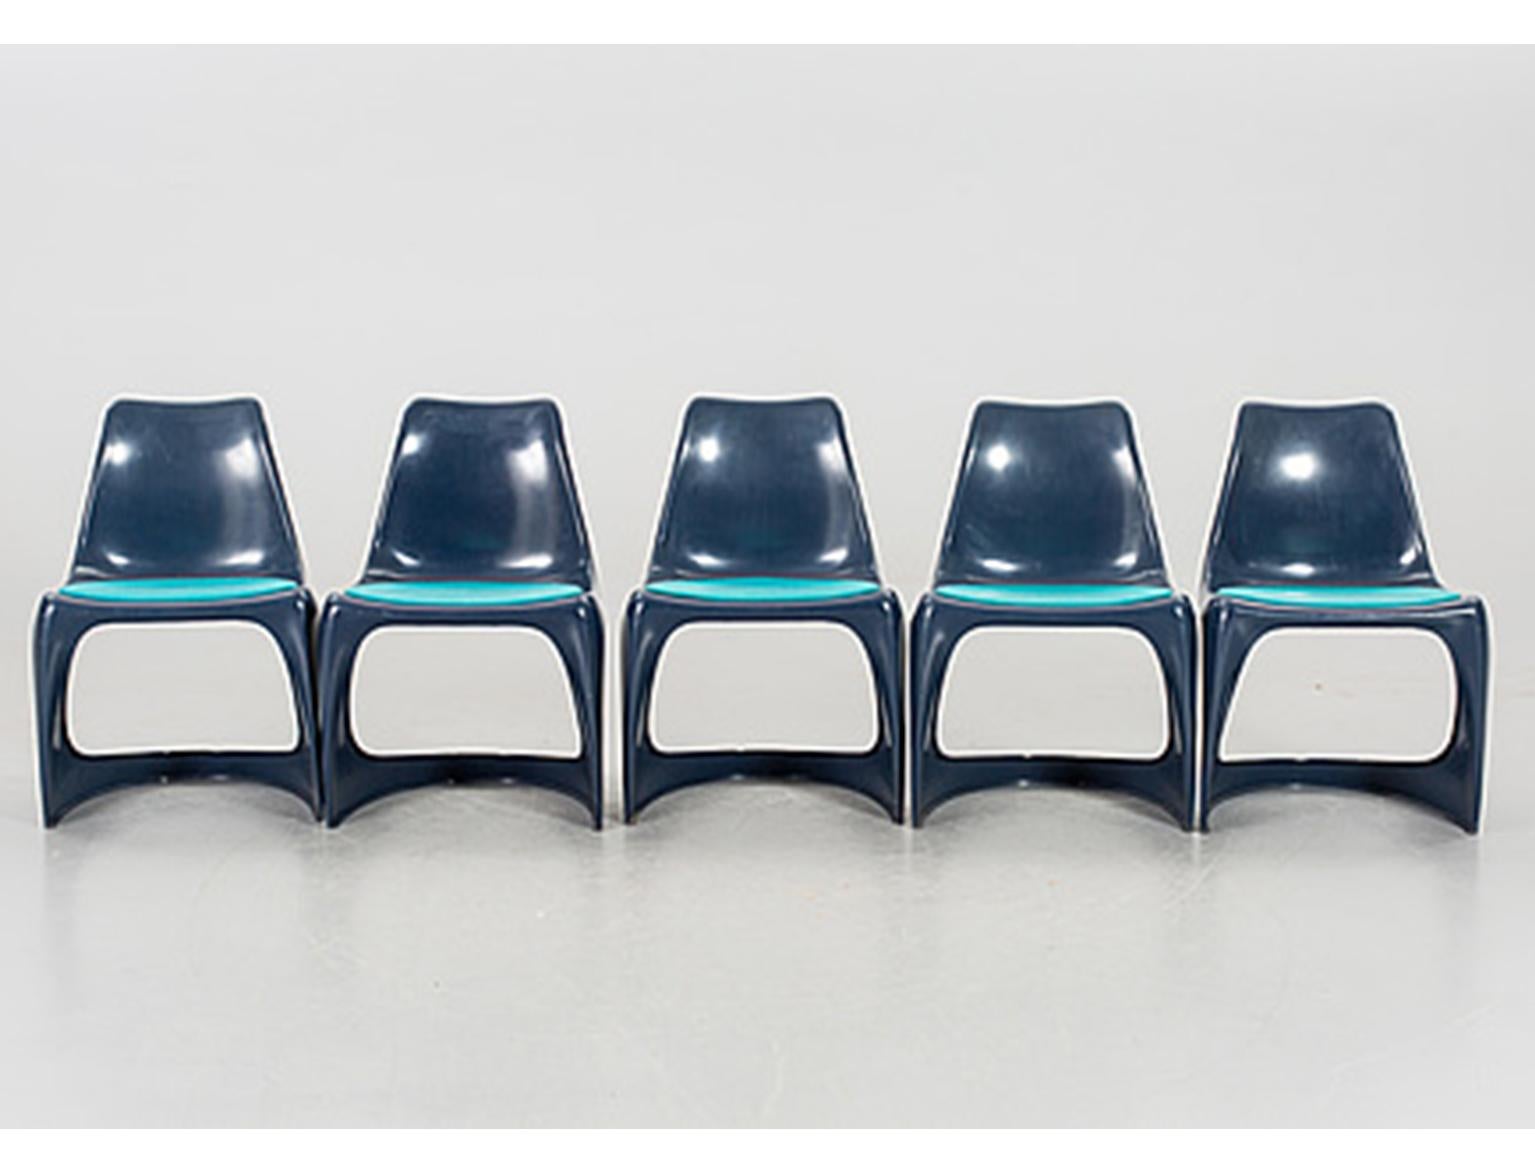 Color Beat, Cado, Five Stacking Chairs, 1970s Denmark, by Sten Østergaard For Sale 1